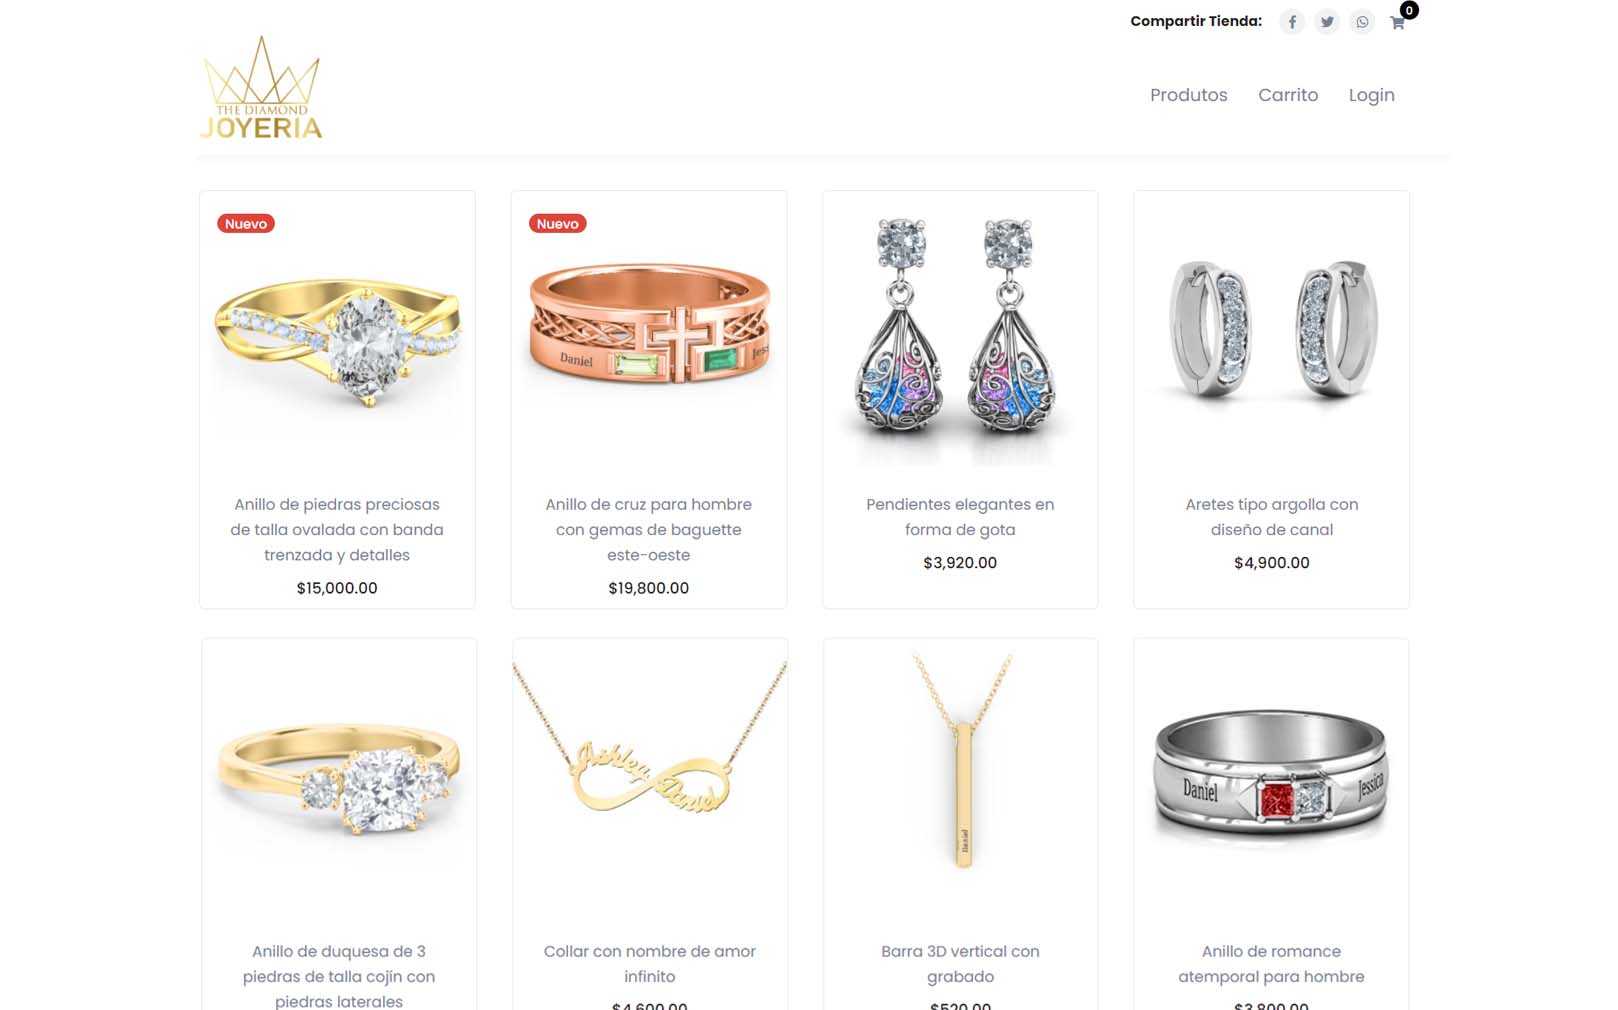 Image of the online store of a jewelry store where images of jewelry products such as rings, earrings and necklaces are shown with their respective prices and descriptions.